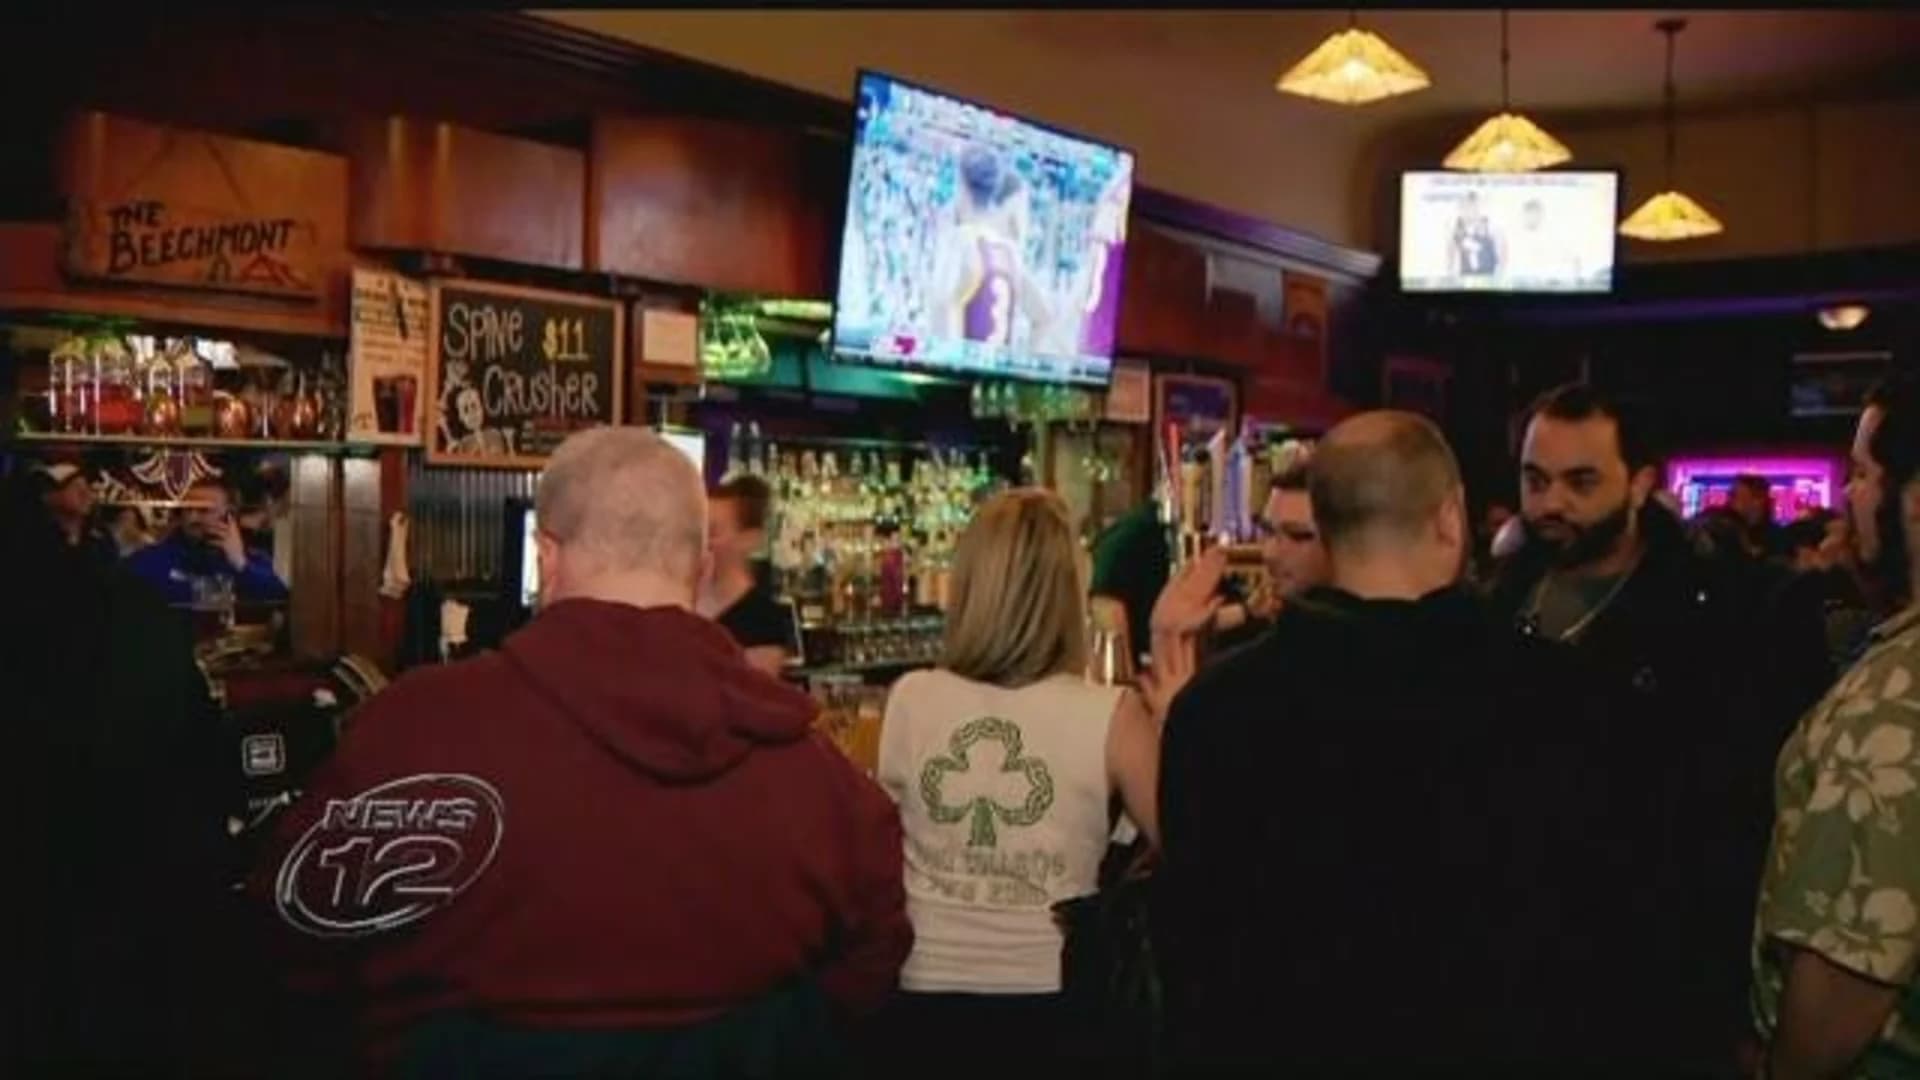 Iona fans cheer on basketball team from college bar